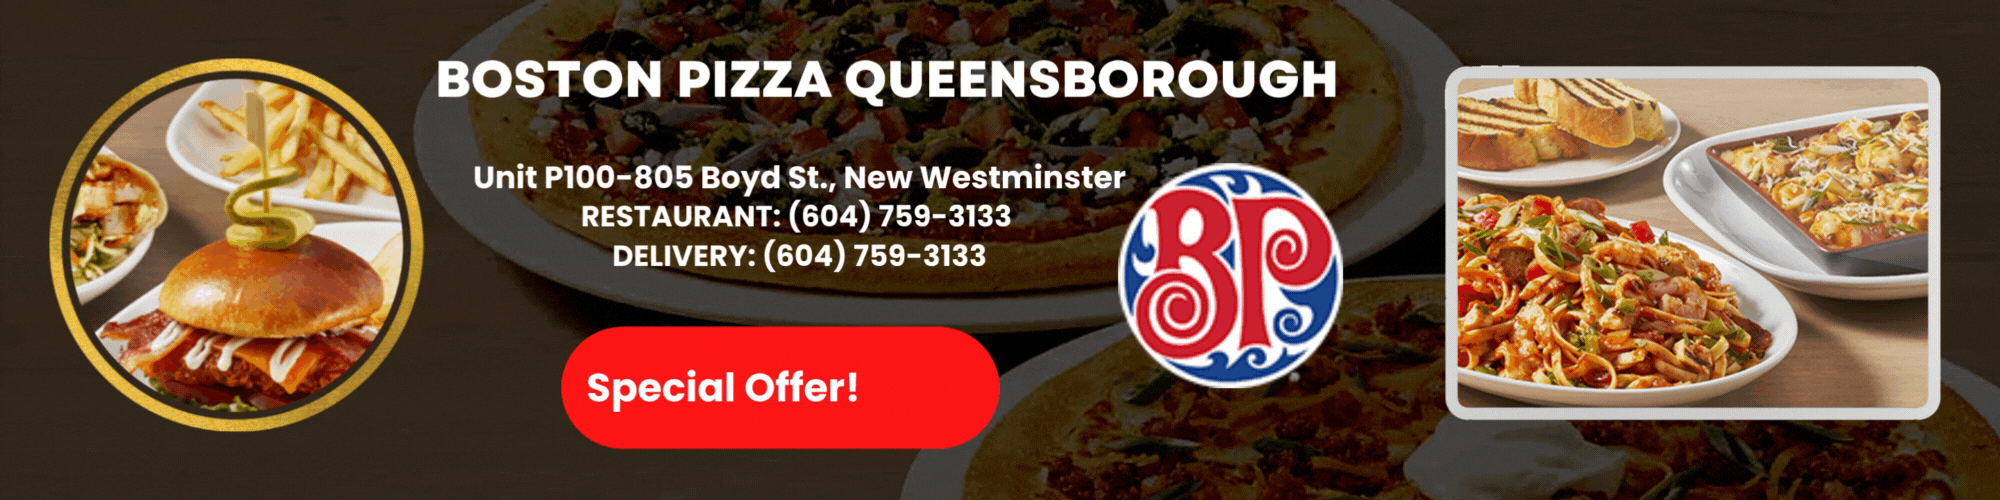 Boston Pizza Queensborough special offer through Coupon Club BC coupons